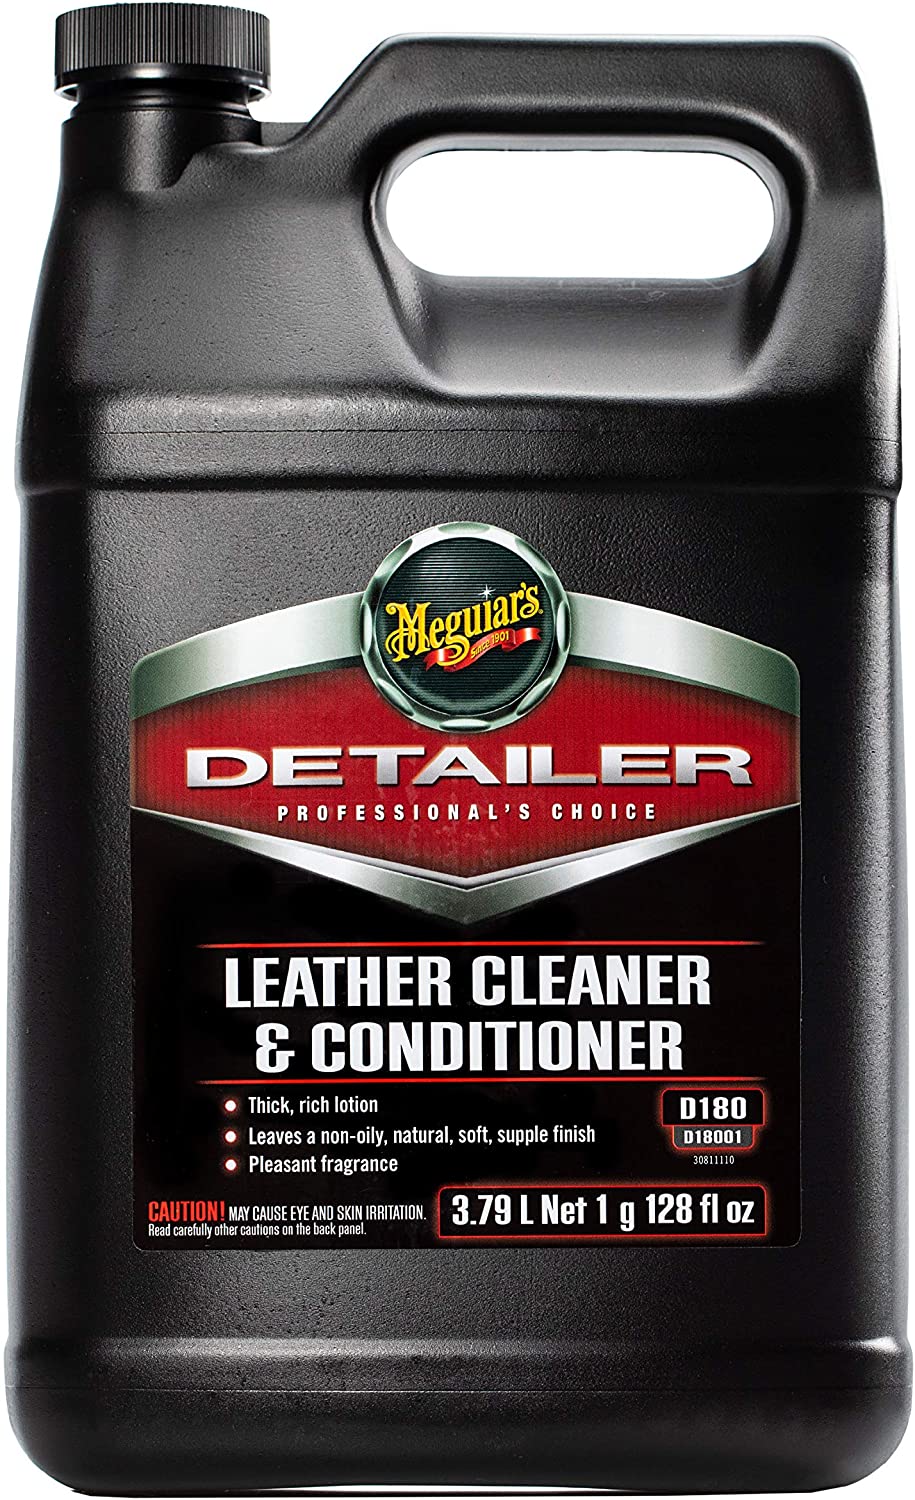 Best Way To Clean Black Leather Car Seats